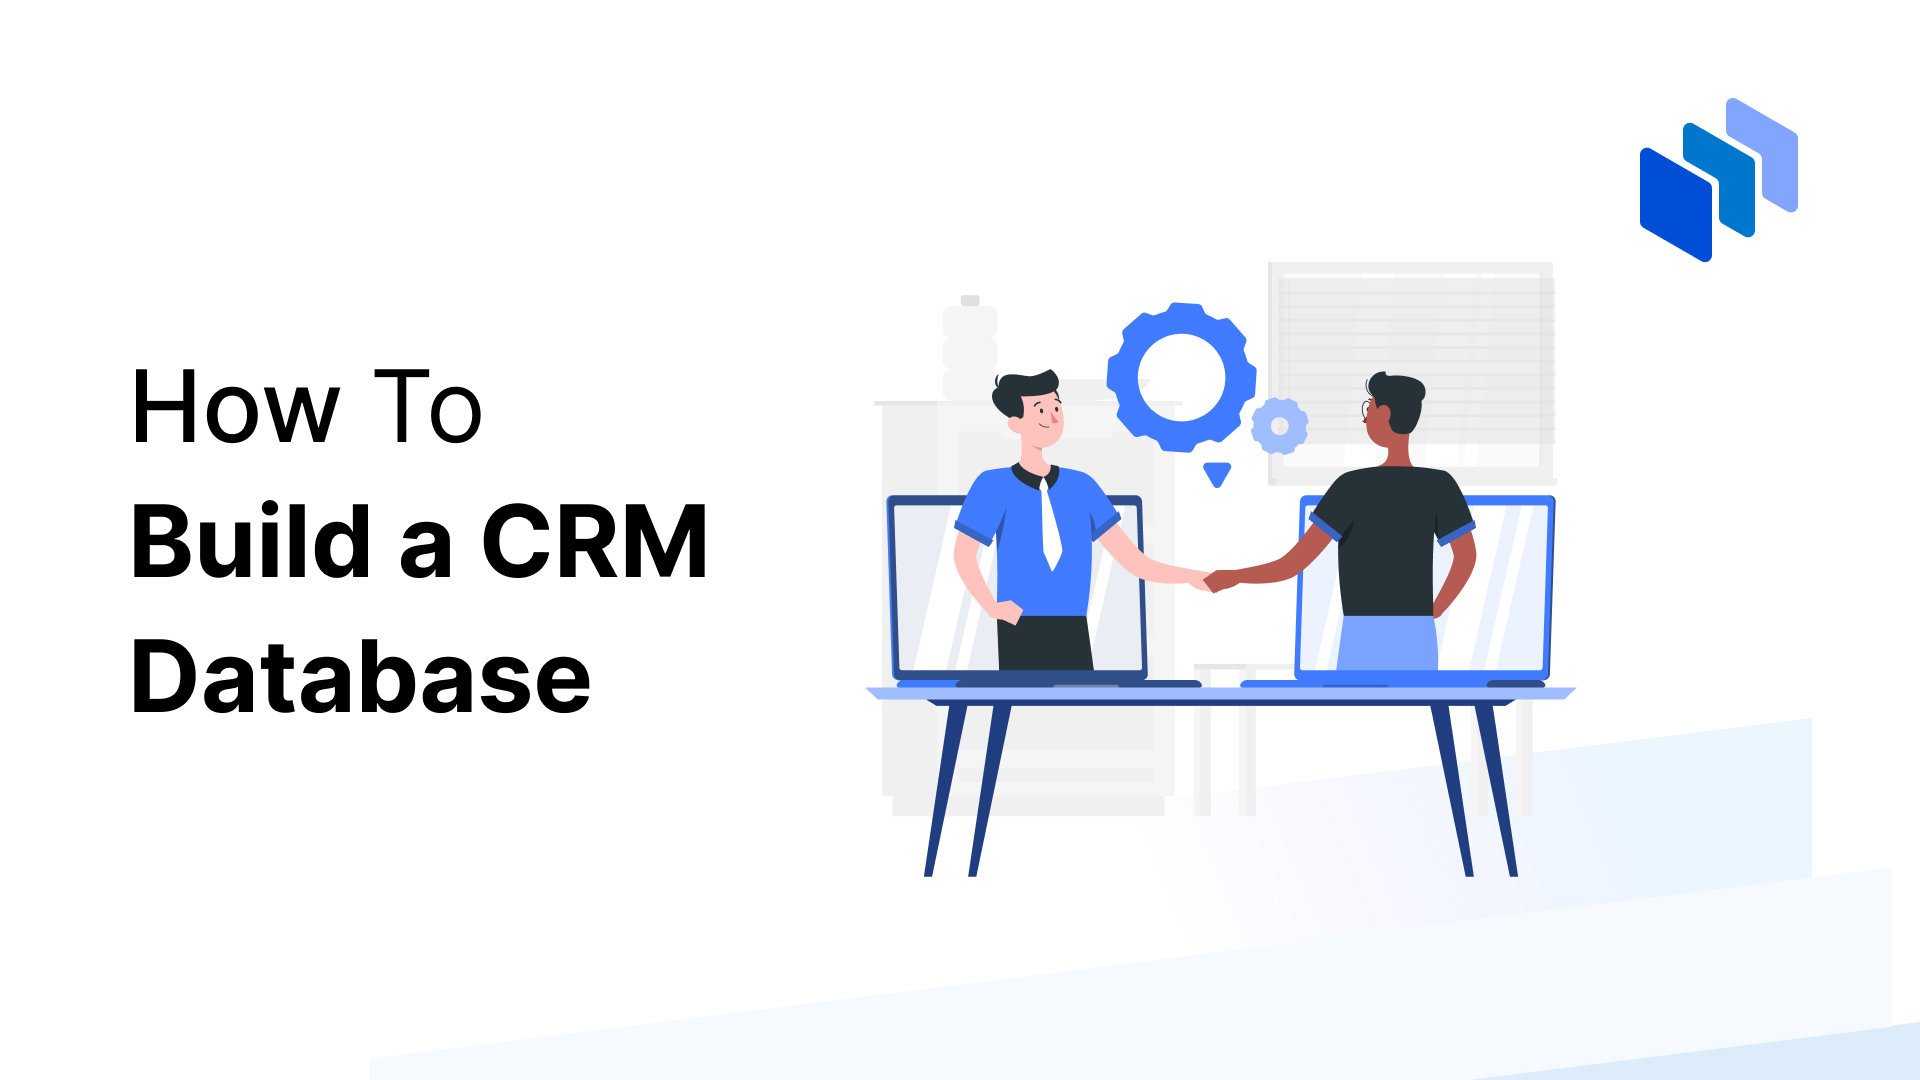 How to Build a CRM Database